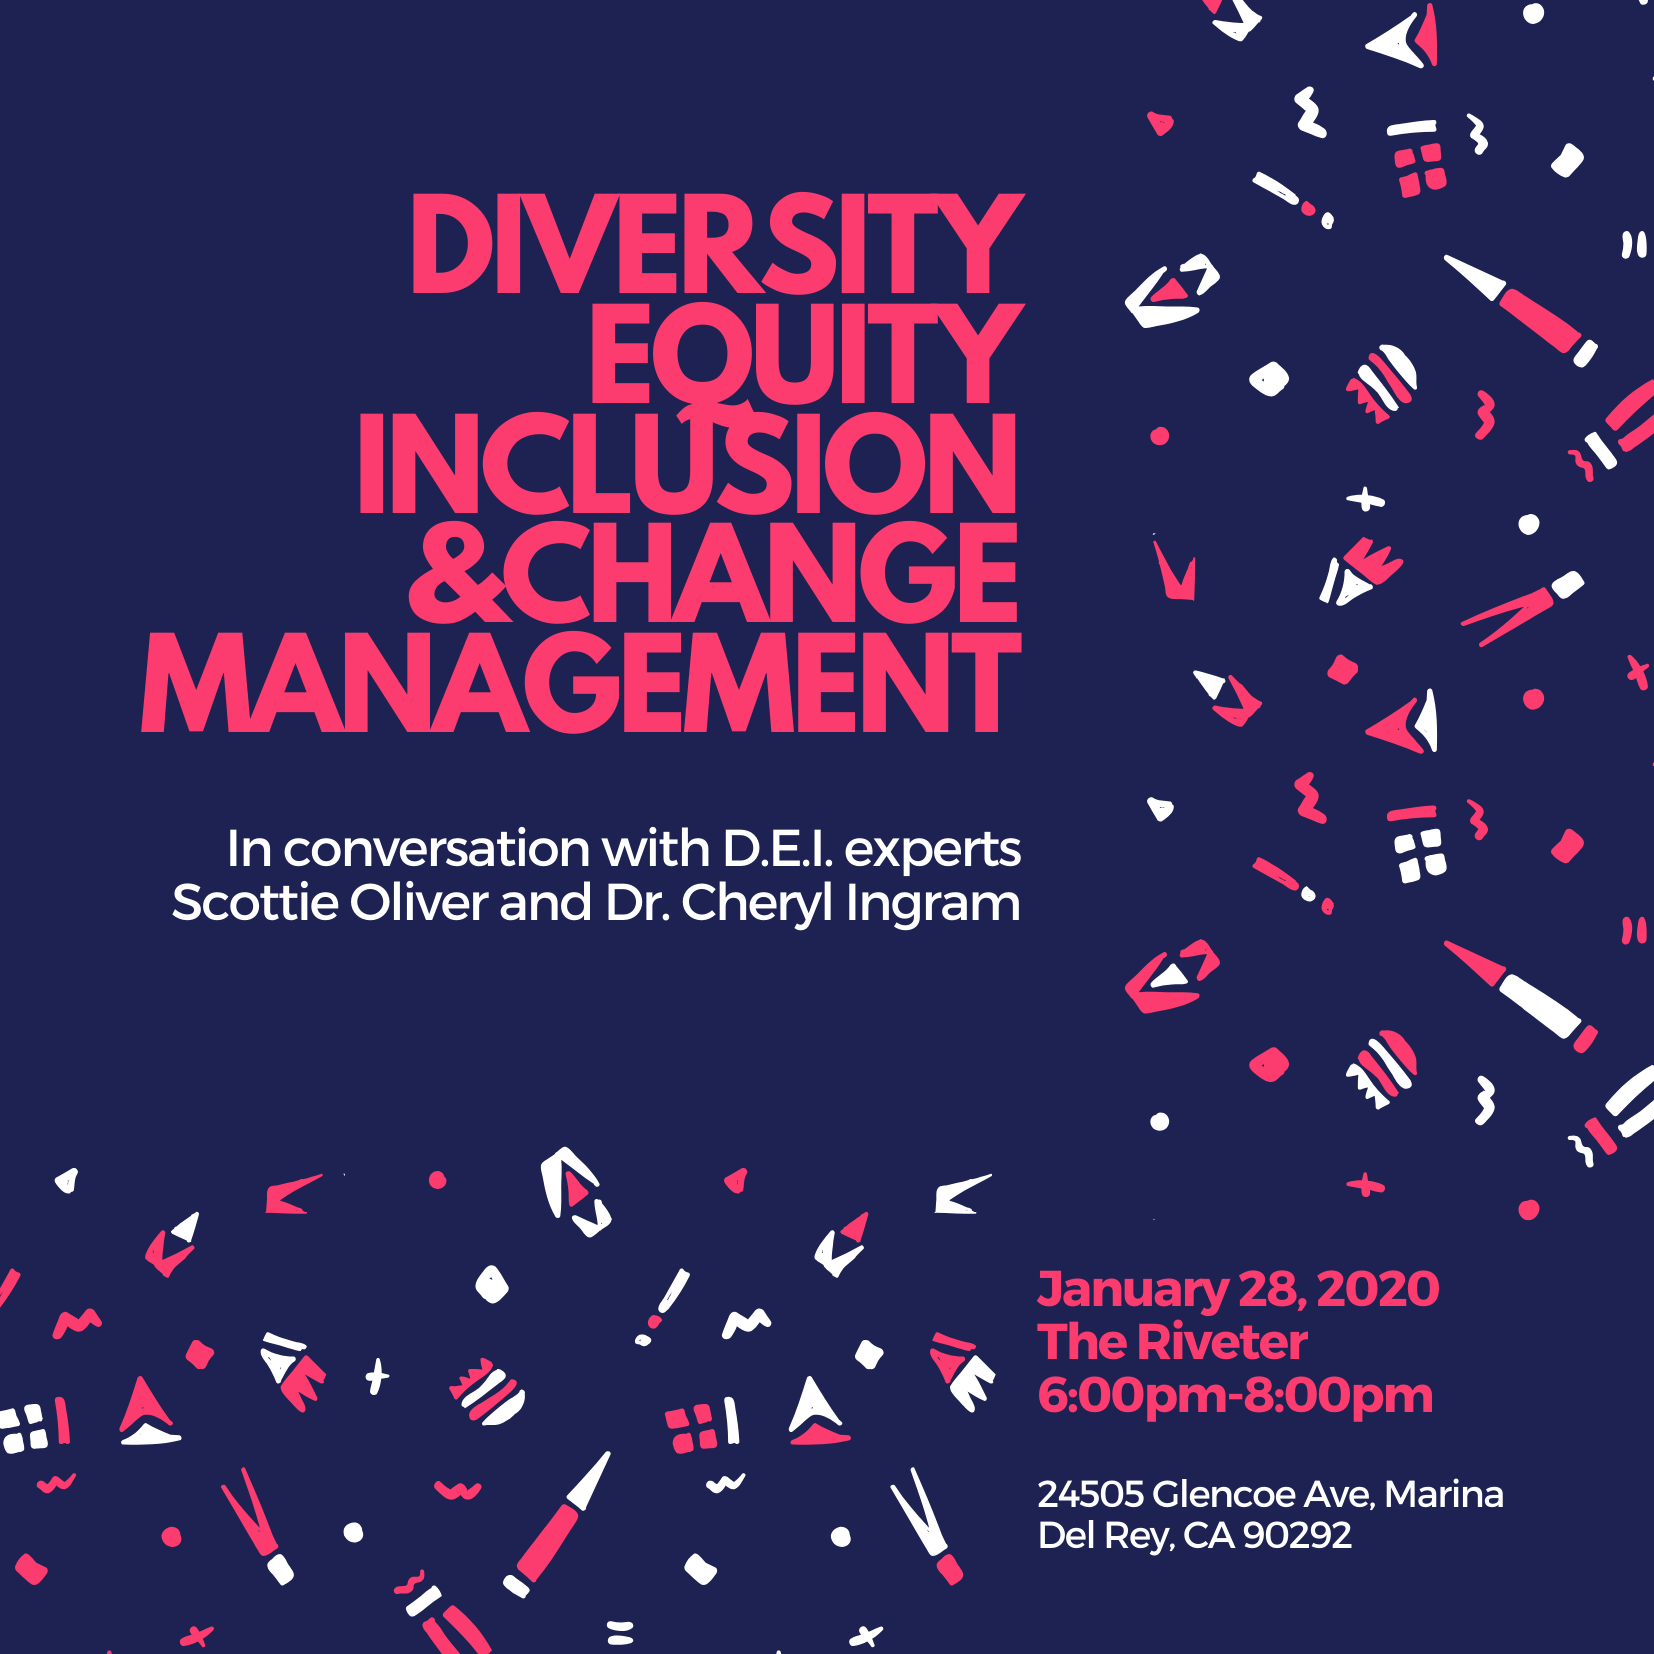 Diversity, Equity, and Inclusion and Change Management